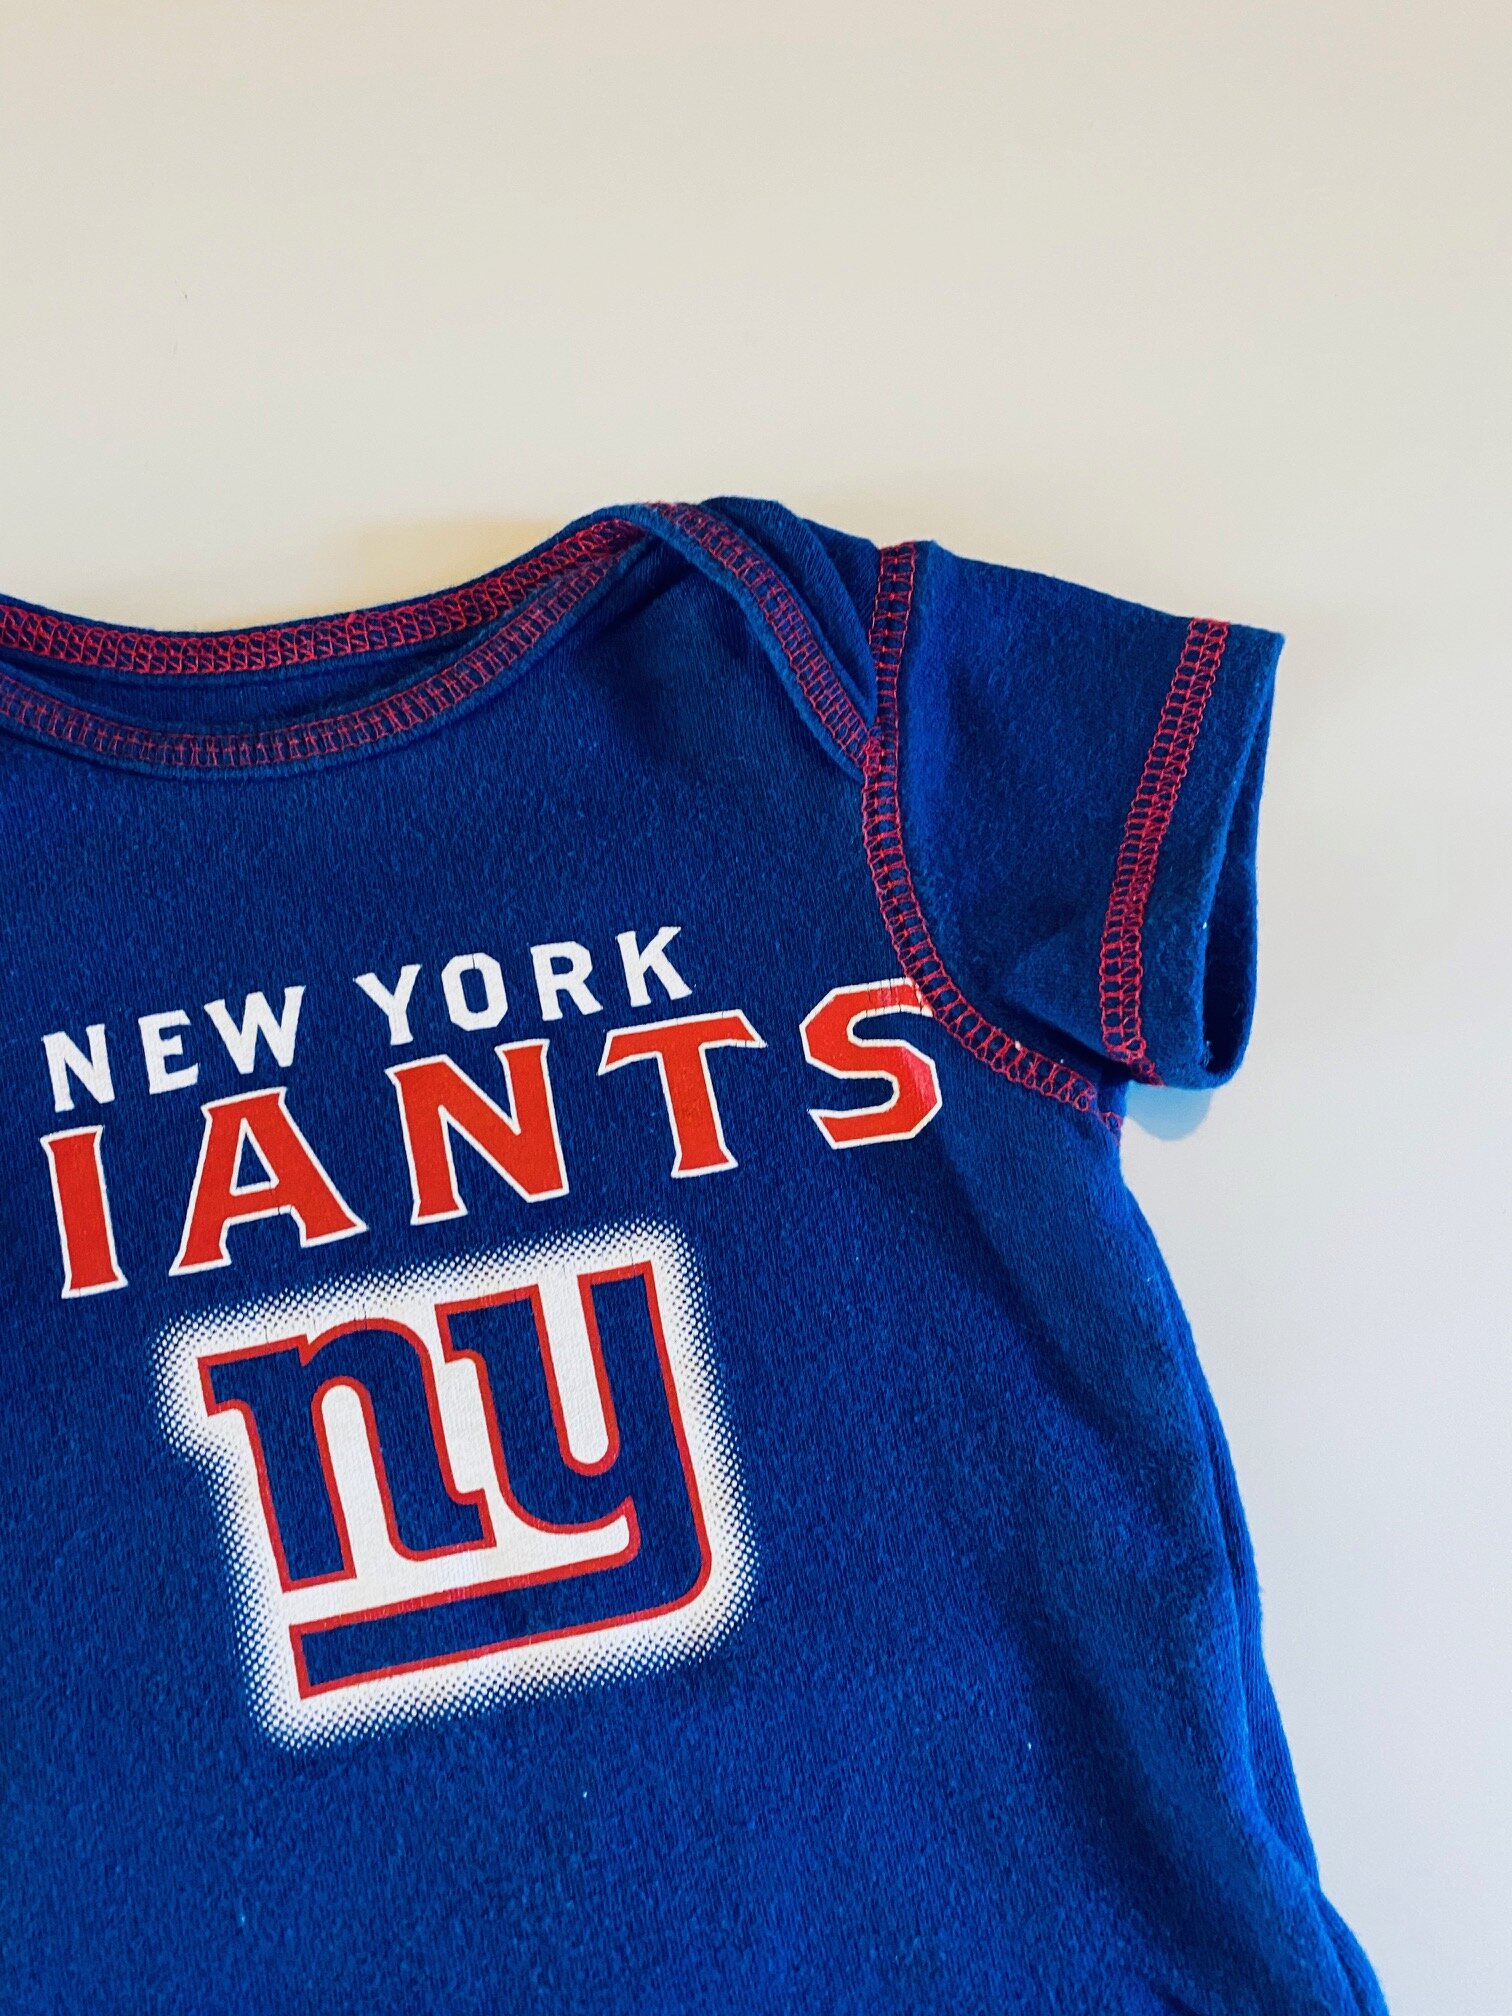 new york giants infant clothes